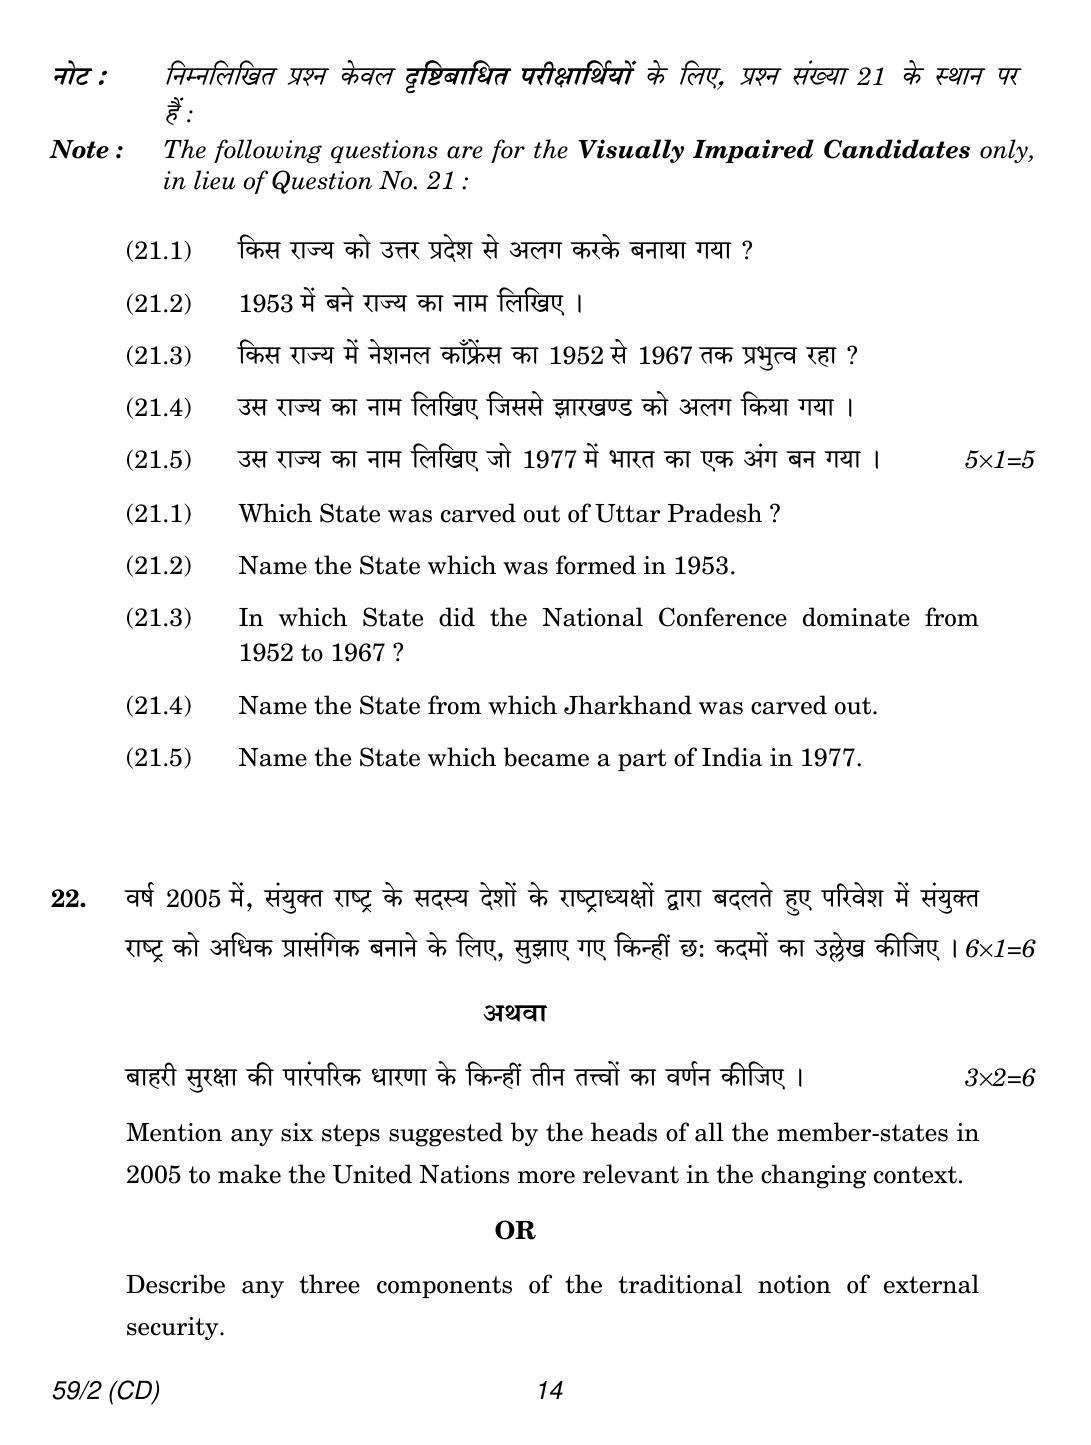 CBSE Class 12 59-2 POLITICAL SCIENCE CD 2018 Question Paper - Page 14